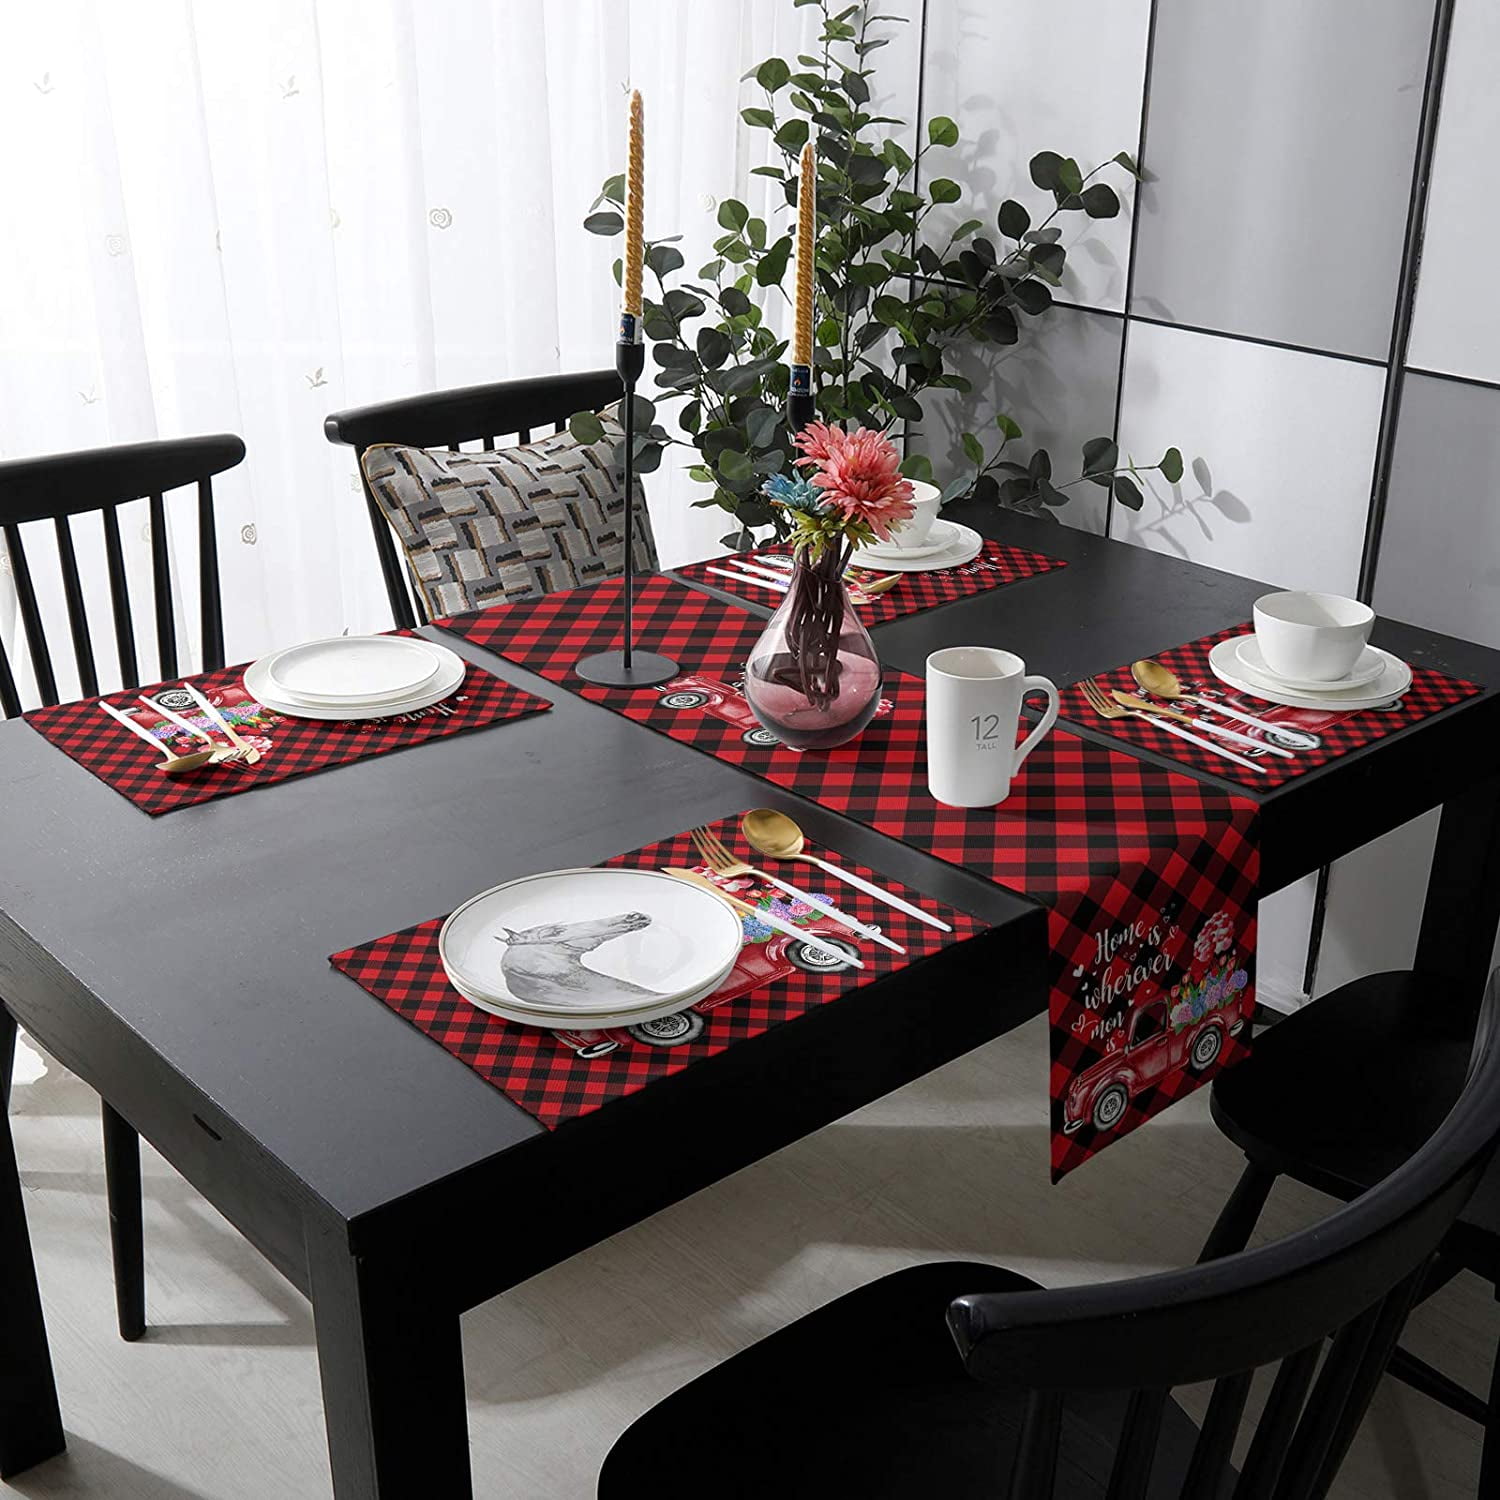 Cotton Linen Dining Table Sets, What Size Table Runner For 6 Chair Dining